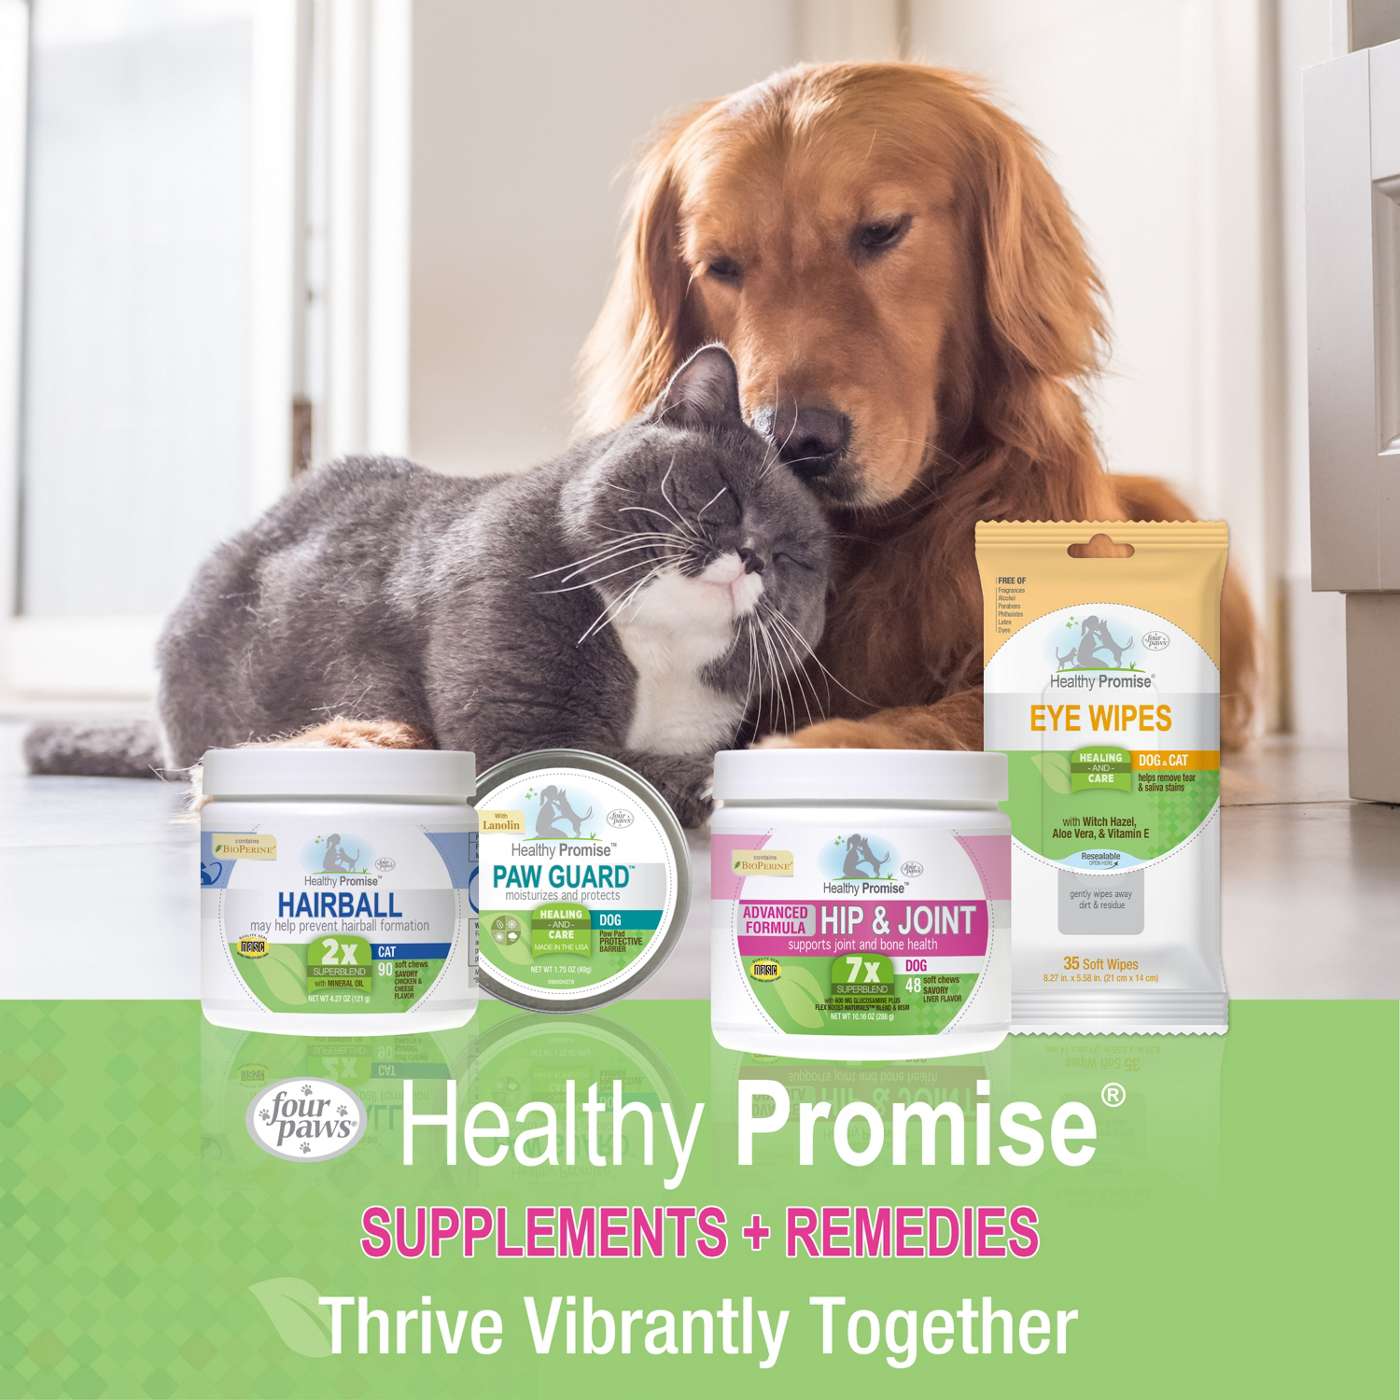 Healthy Promise Ear Wipes For Dogs & Cats; image 2 of 8